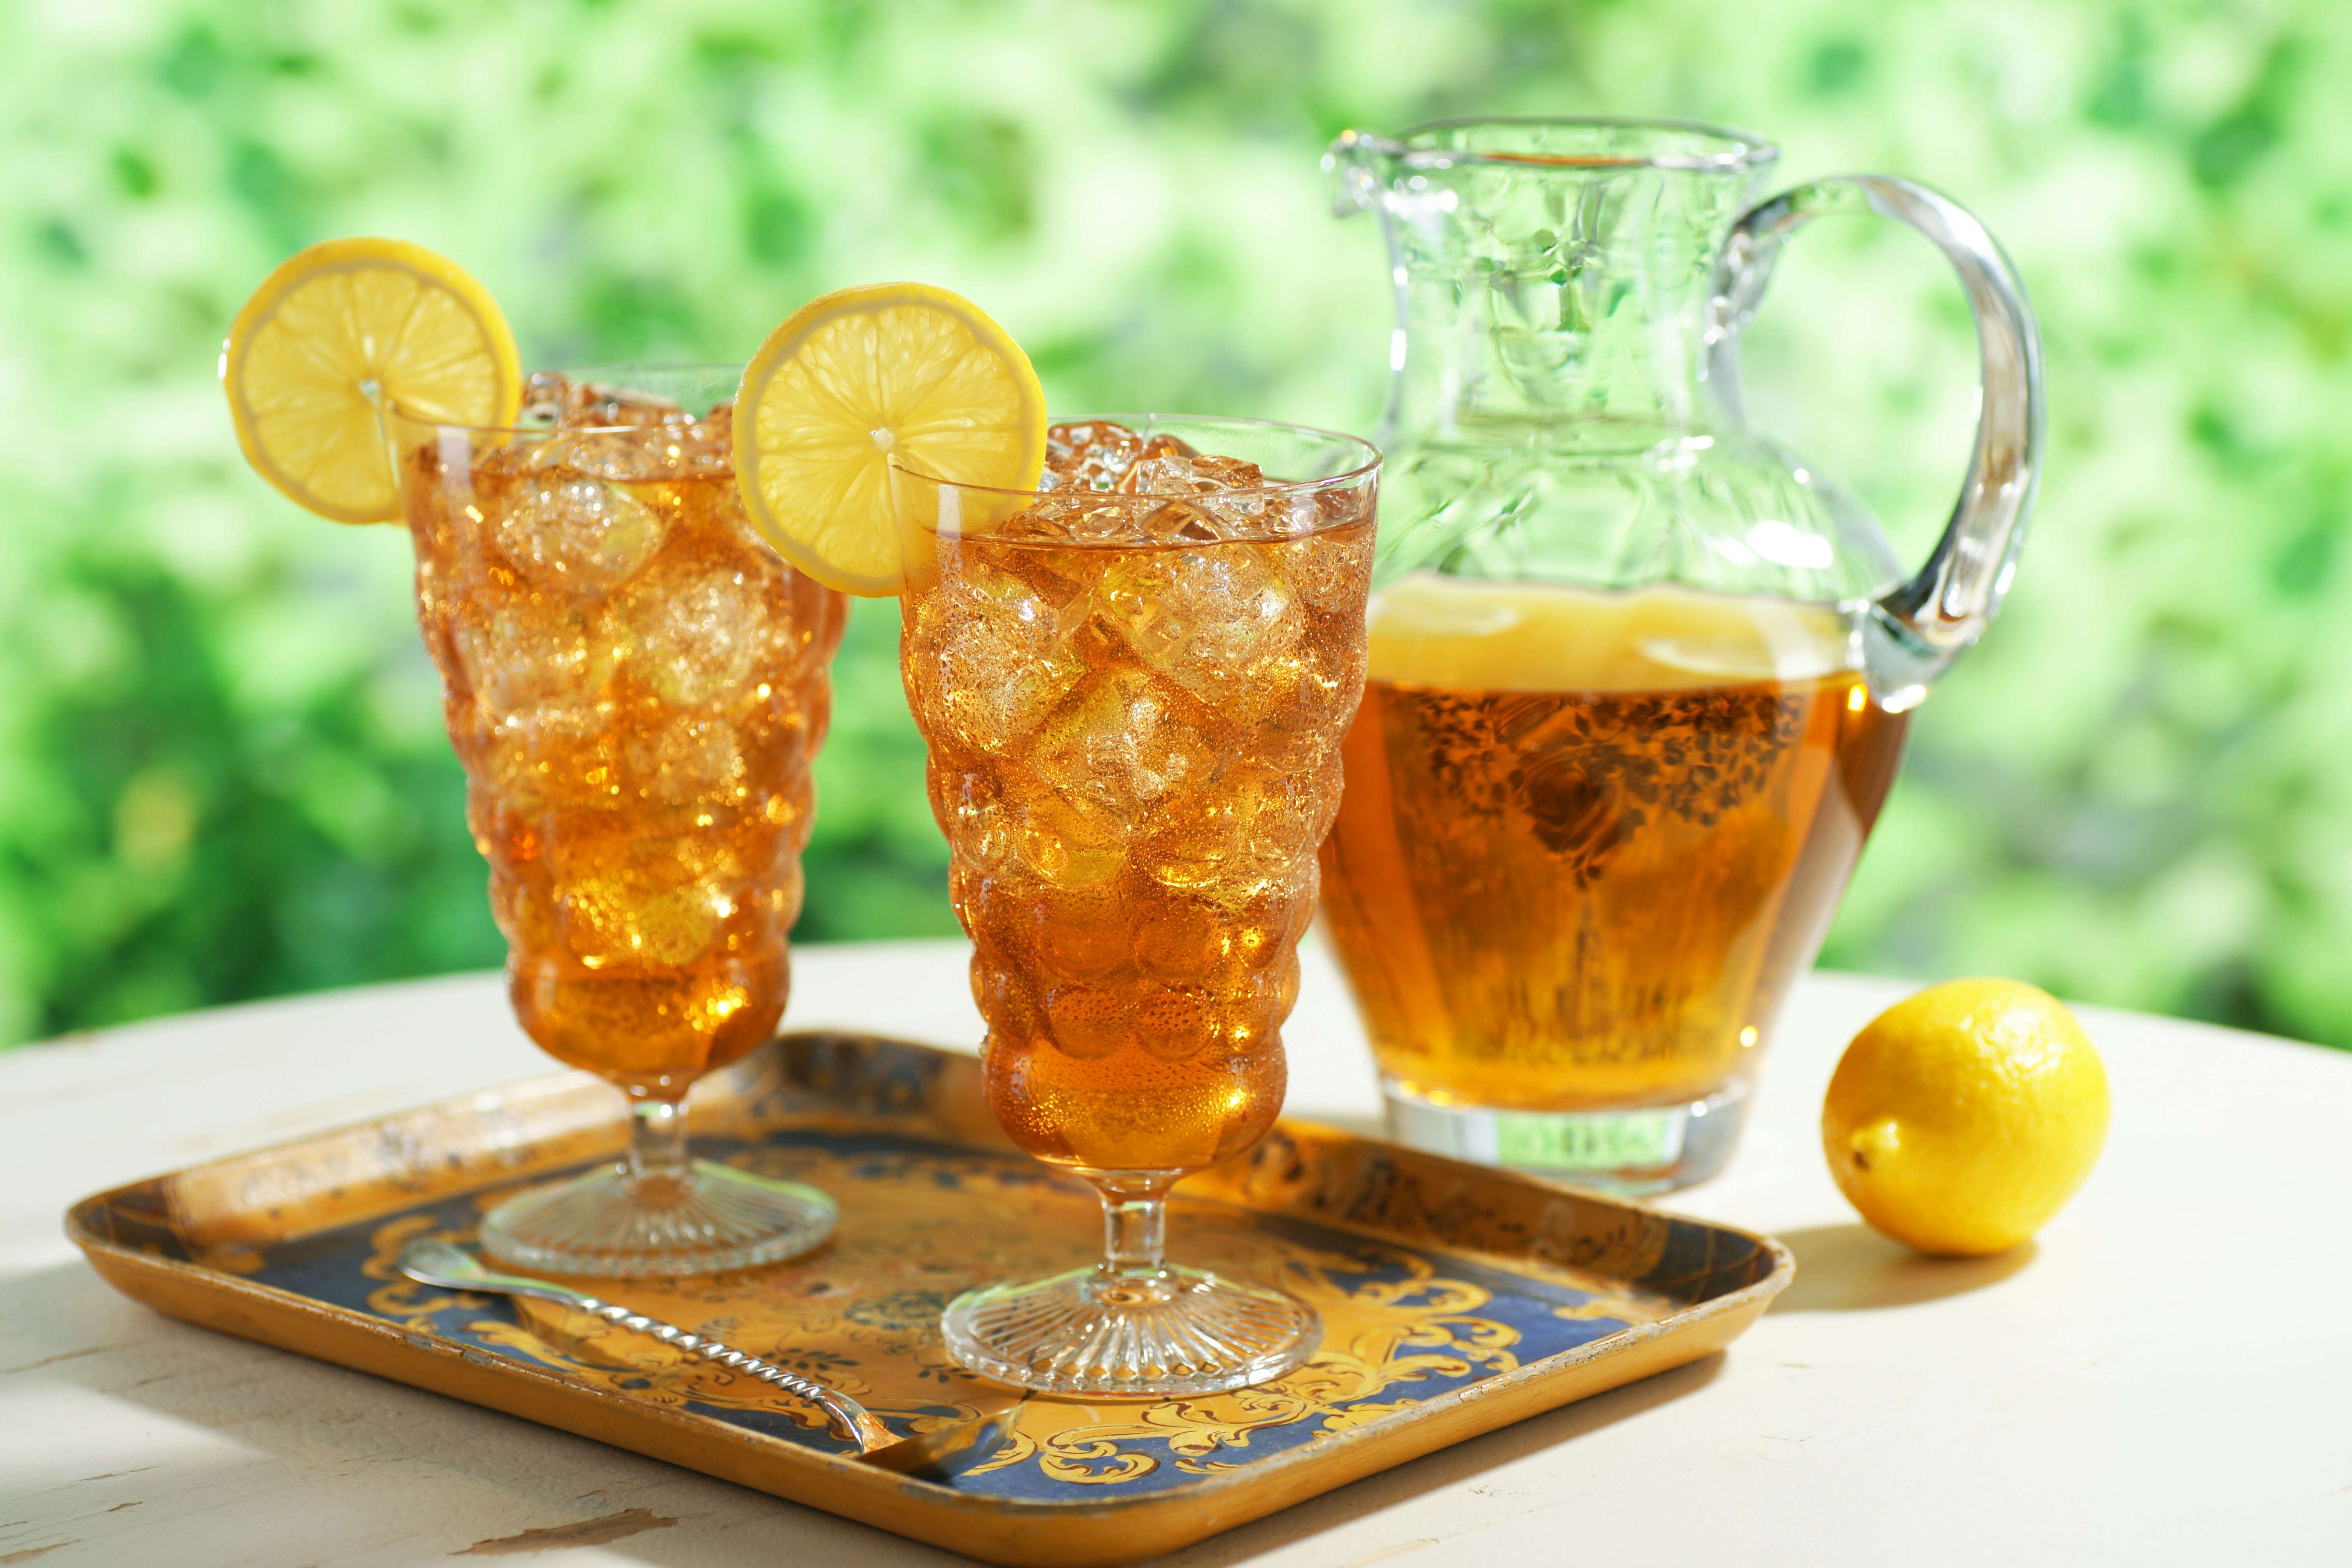 Two glasses of iced tea with pitcher